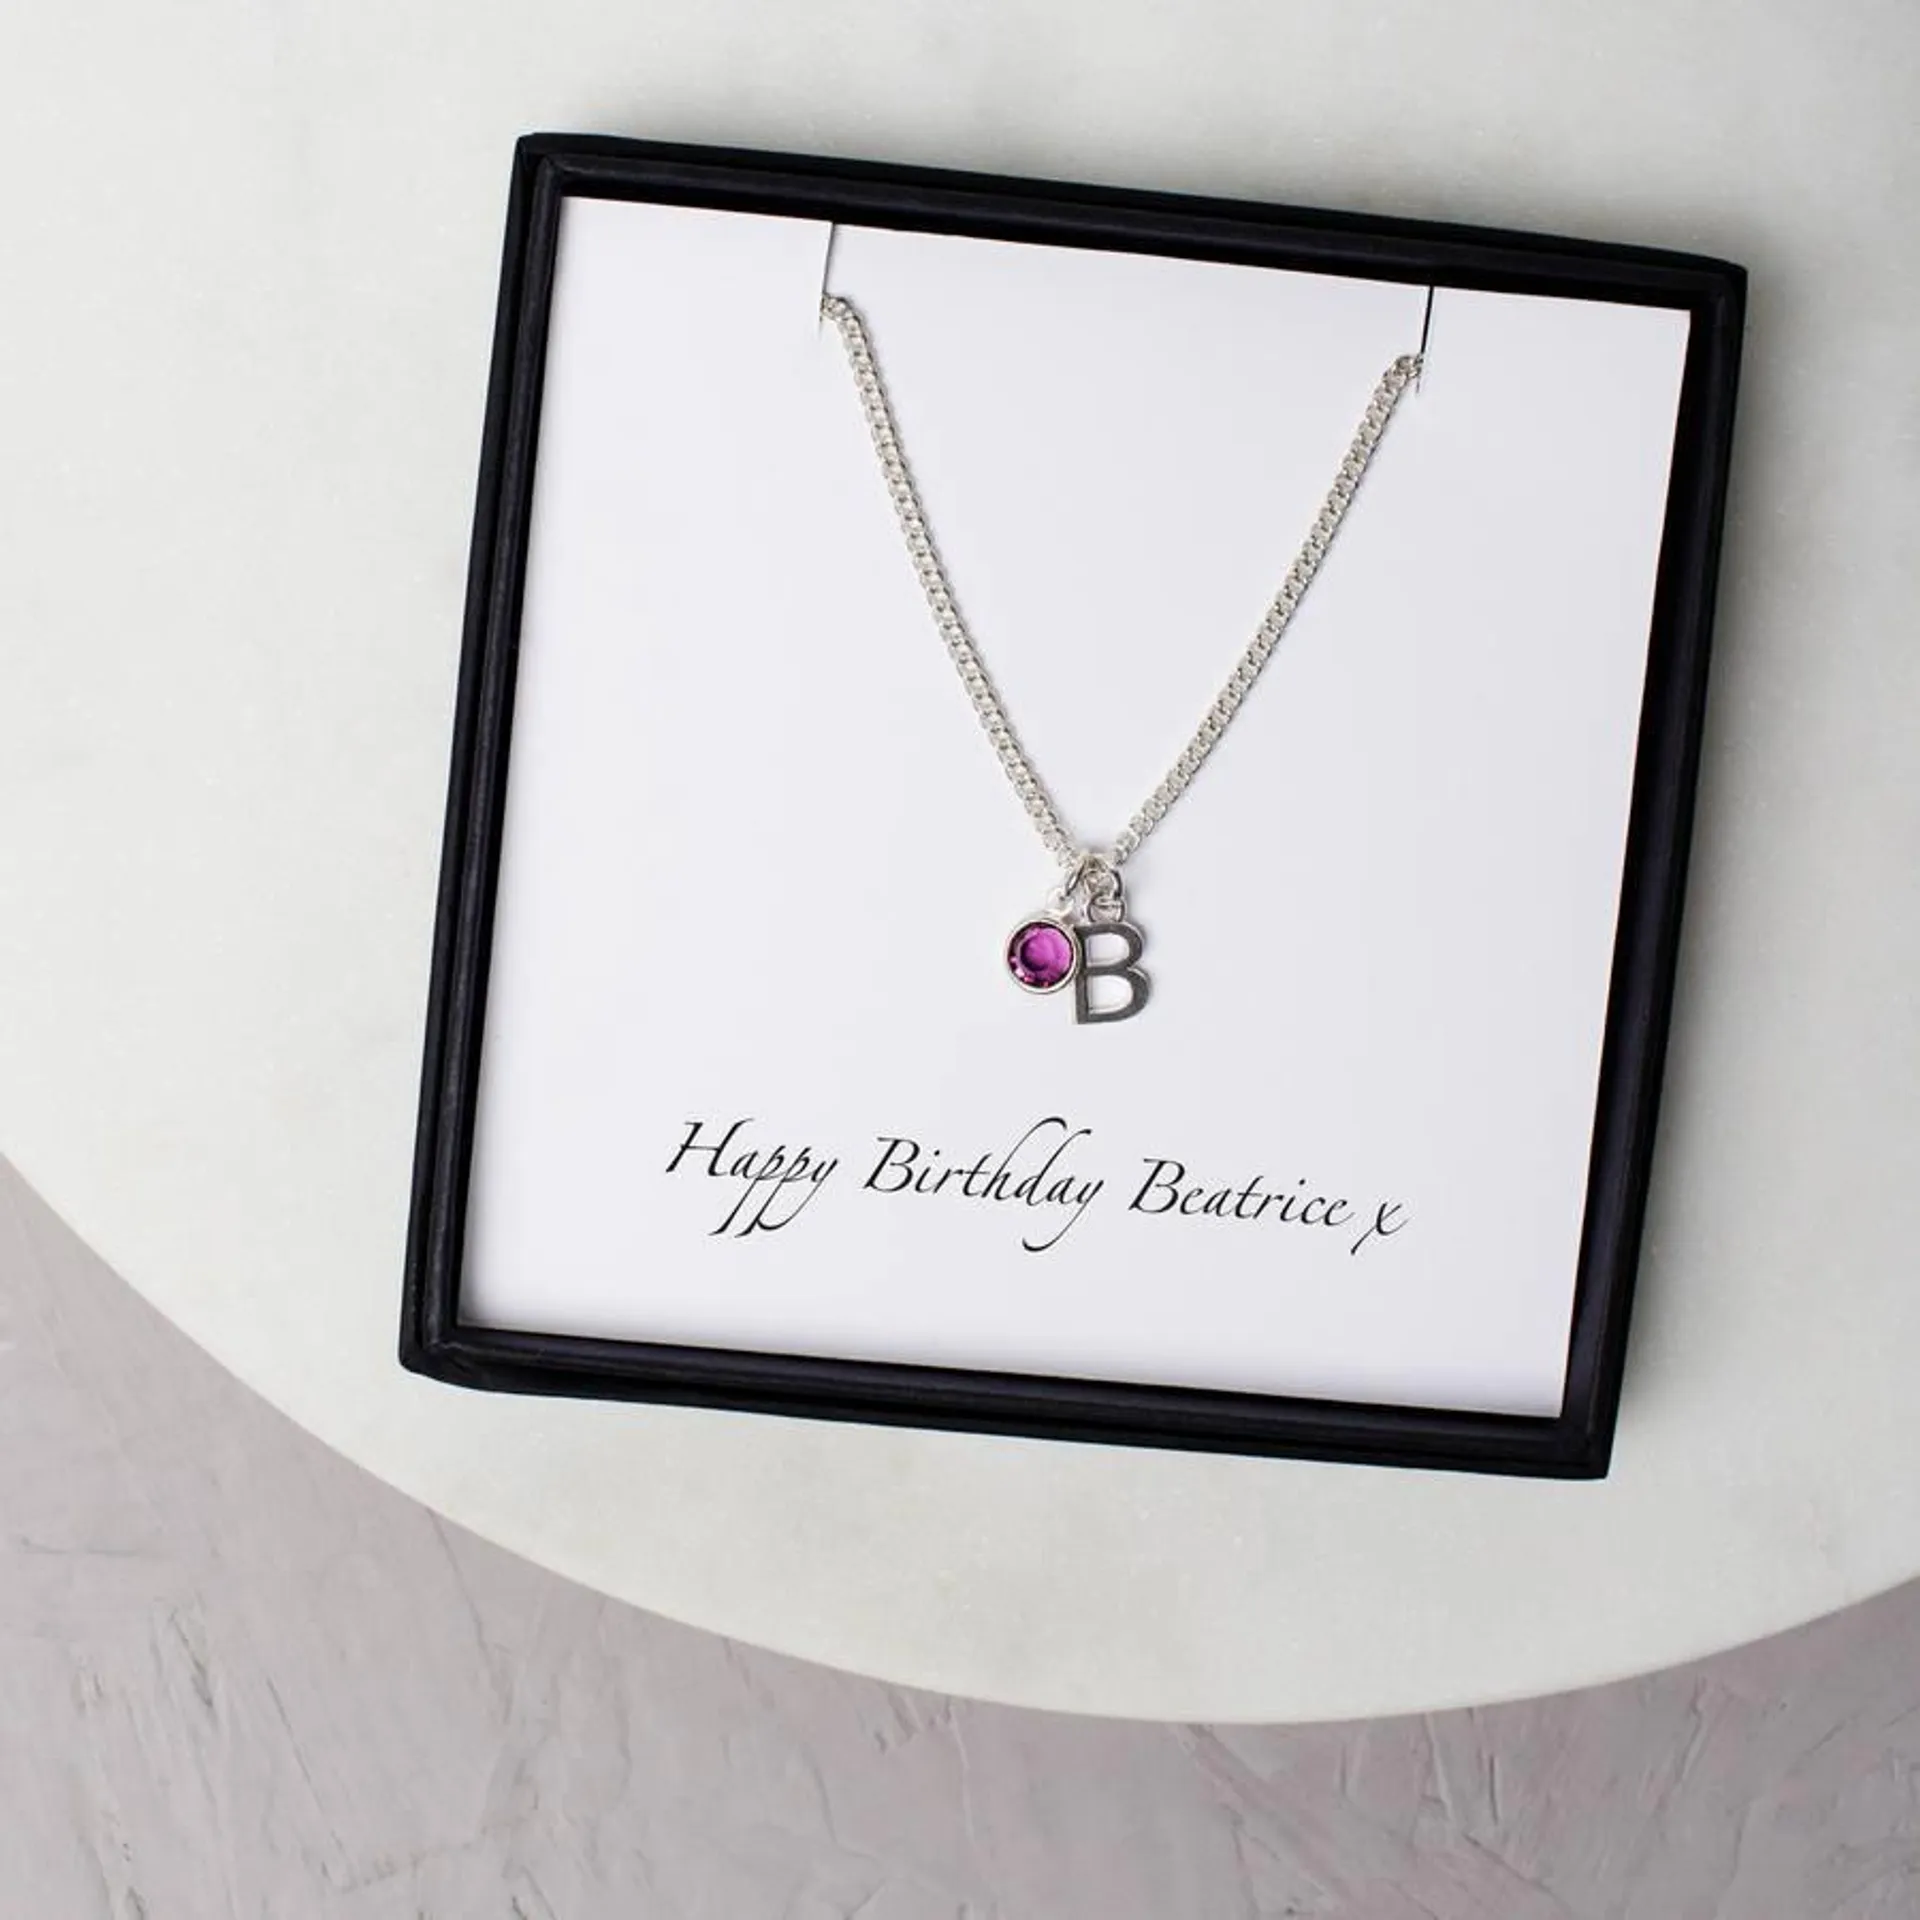 Personalised Swarovski Birthstone And Initial Necklace